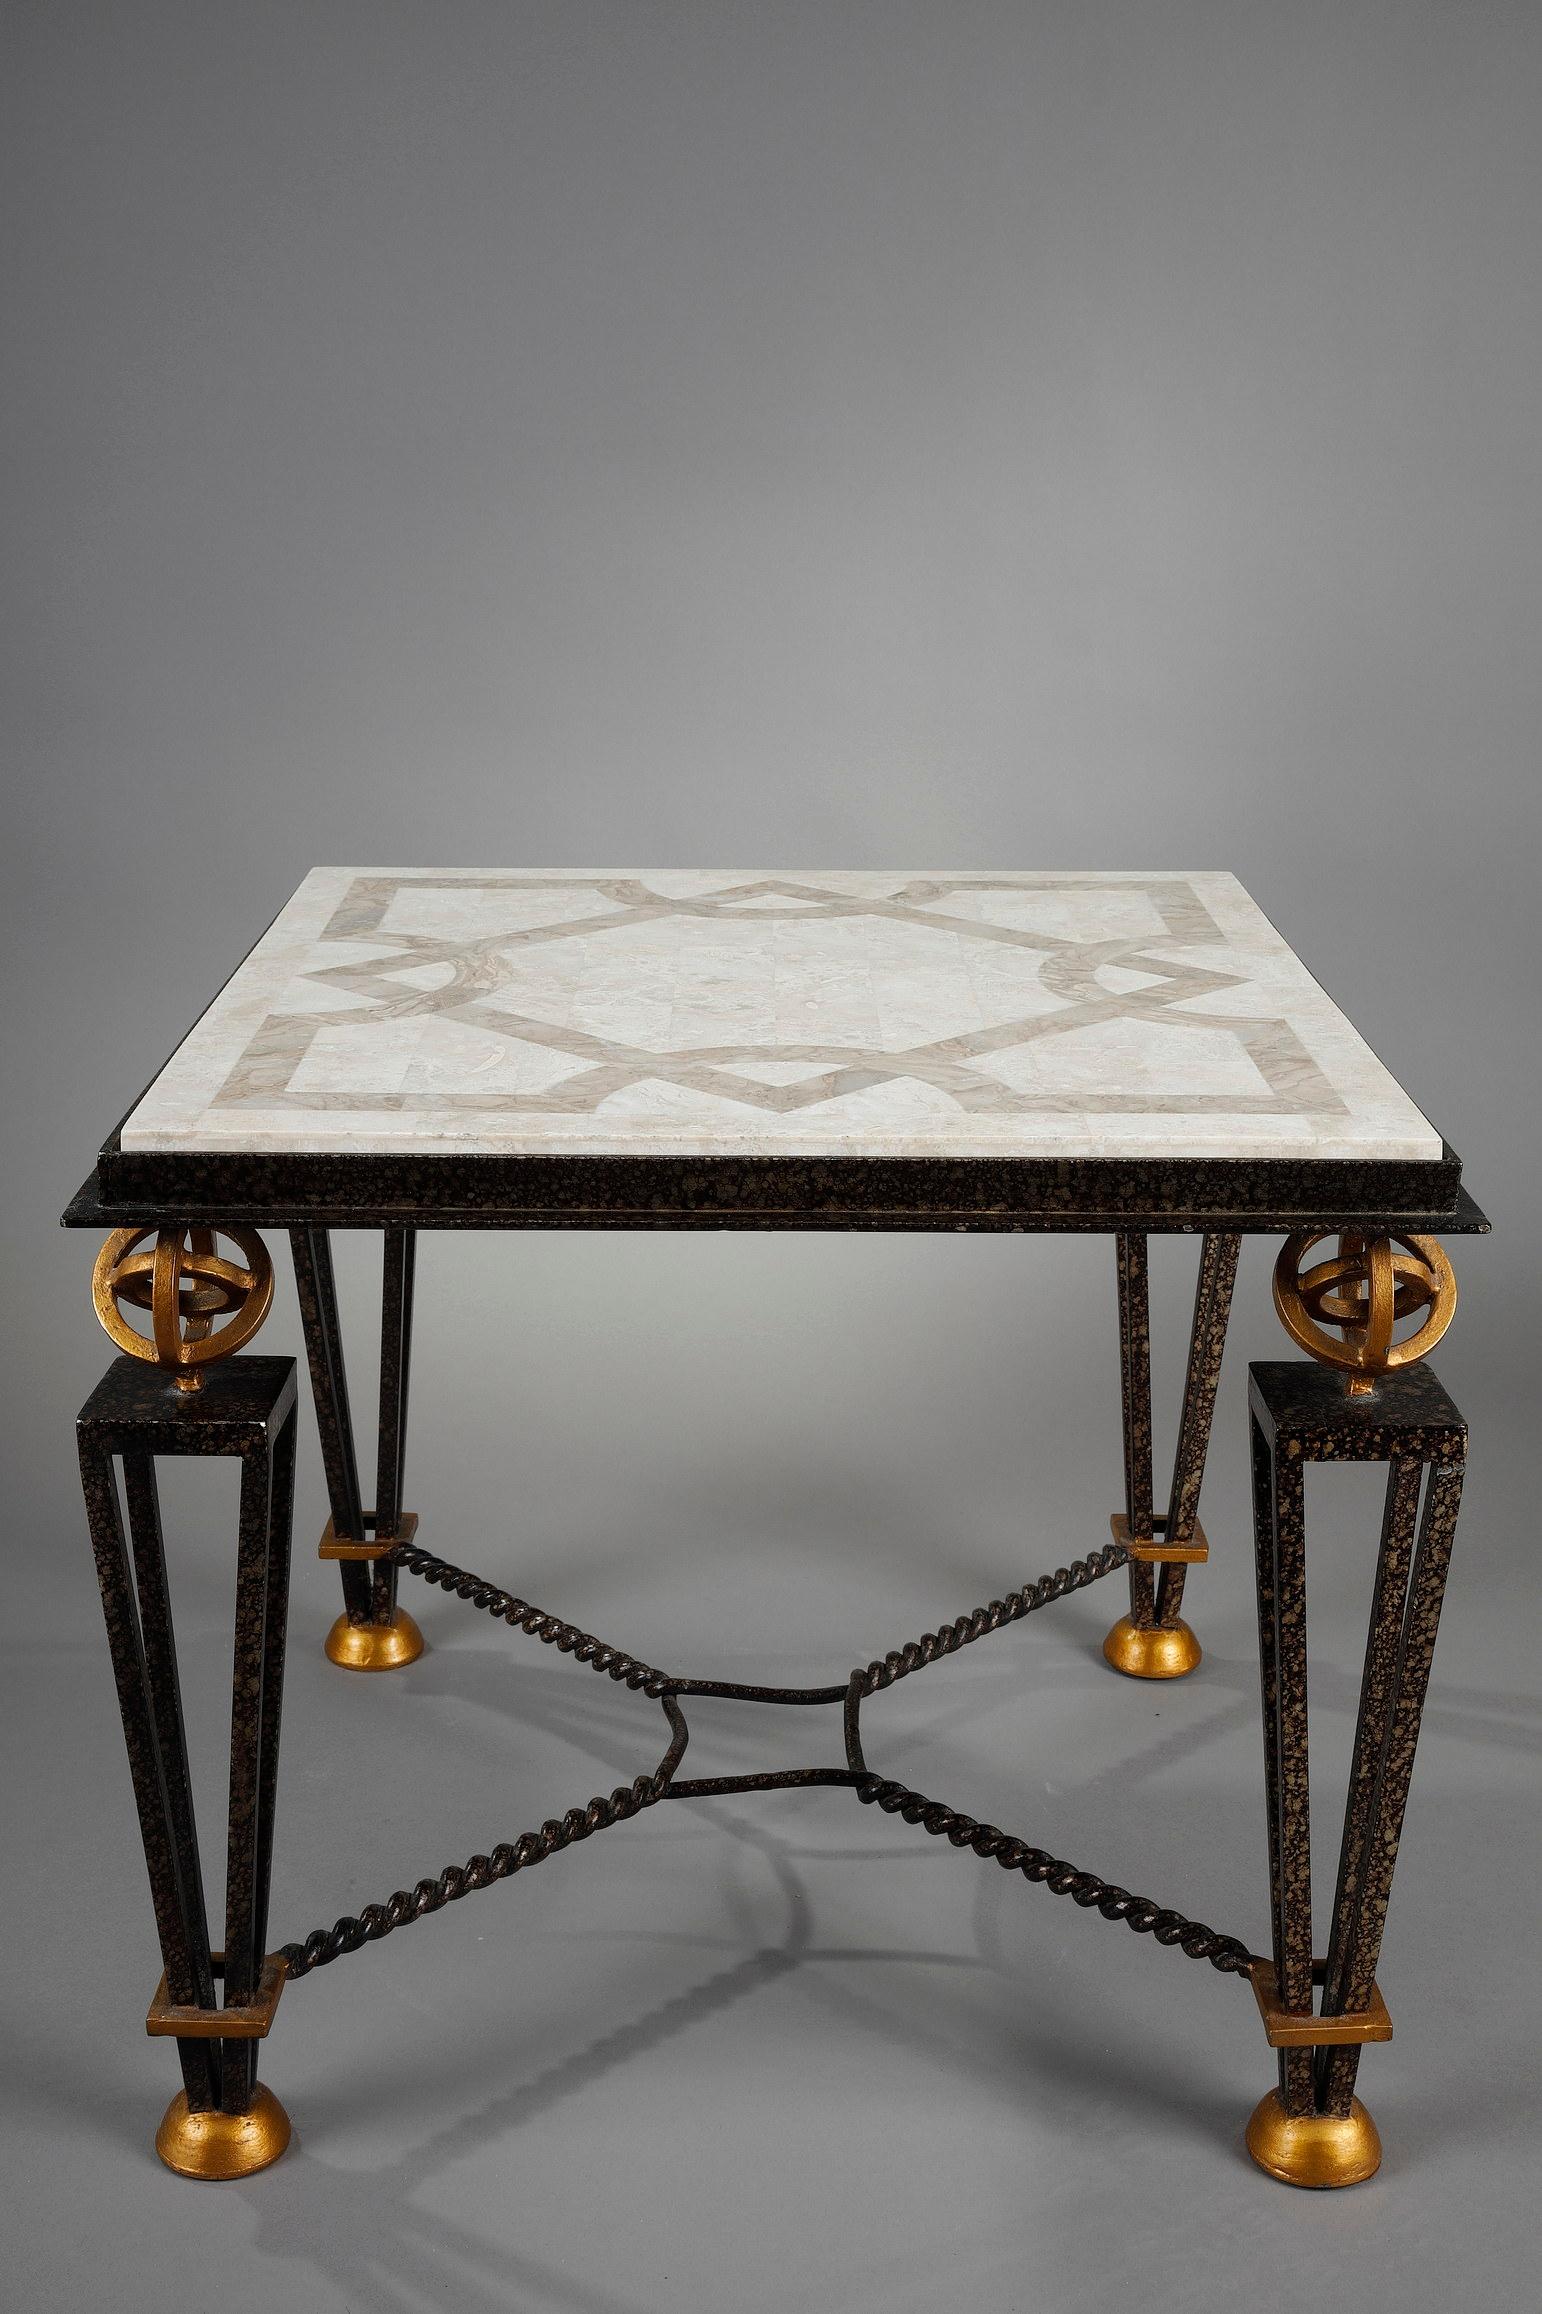 Small table in the taste of Gilbert Poillerat (1902-1988) in lacquered, gilded and oxidized metal. The tray is realized in marquetry of stone of different shades with geometrical patterns. The table rests on four feet in inverted openwork pyramids